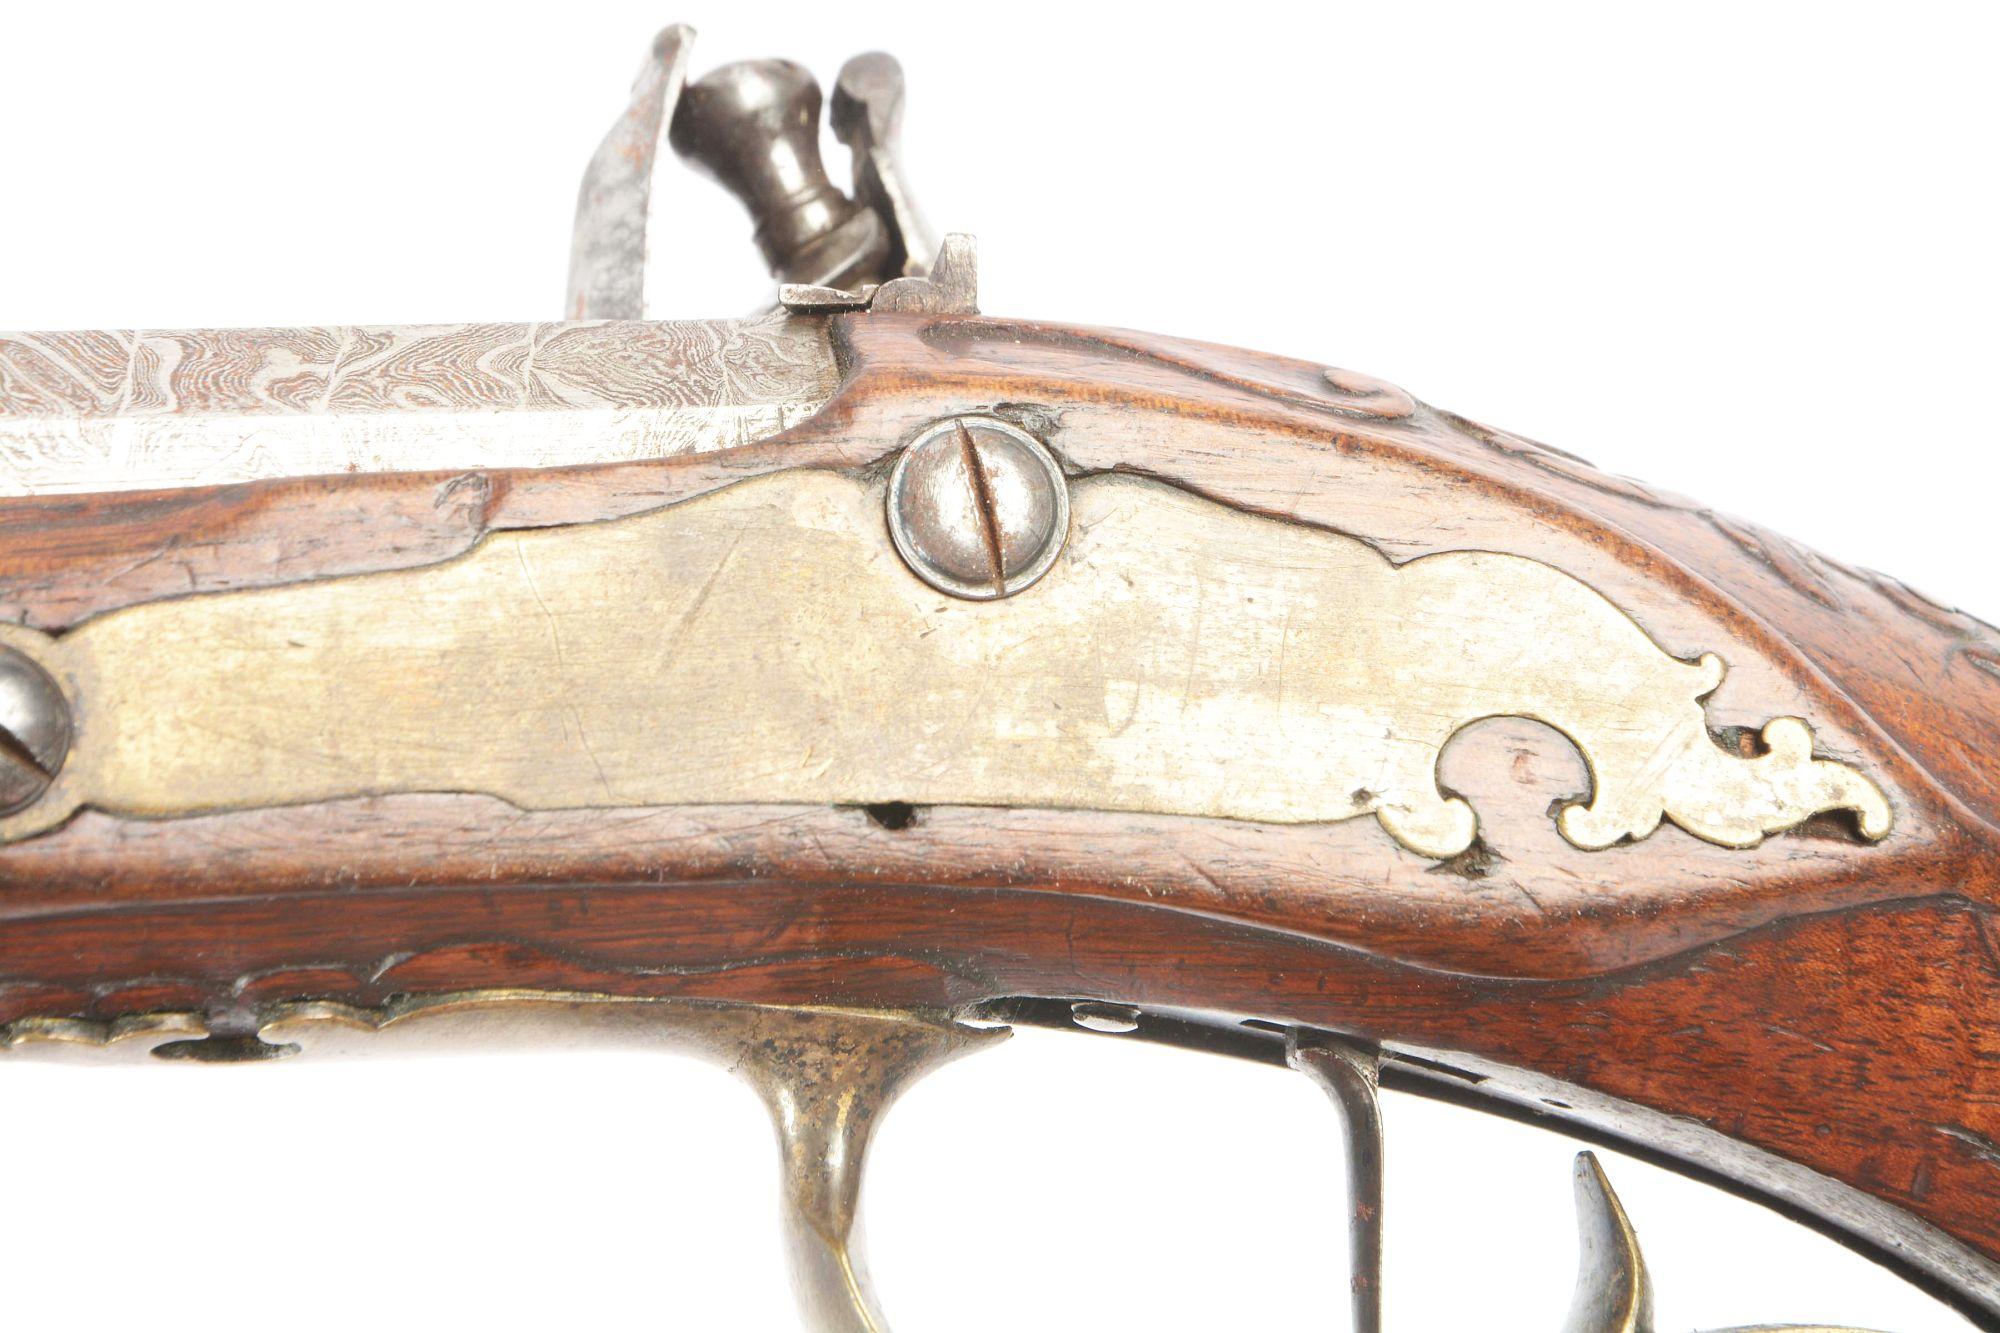 (A) LOT OF TWO: COLLECTOR'S LOT OF SINGLE SHOT FLINTLOCK PISTOLS, ONE A FRENCH MODEL 1813, THE OTHER